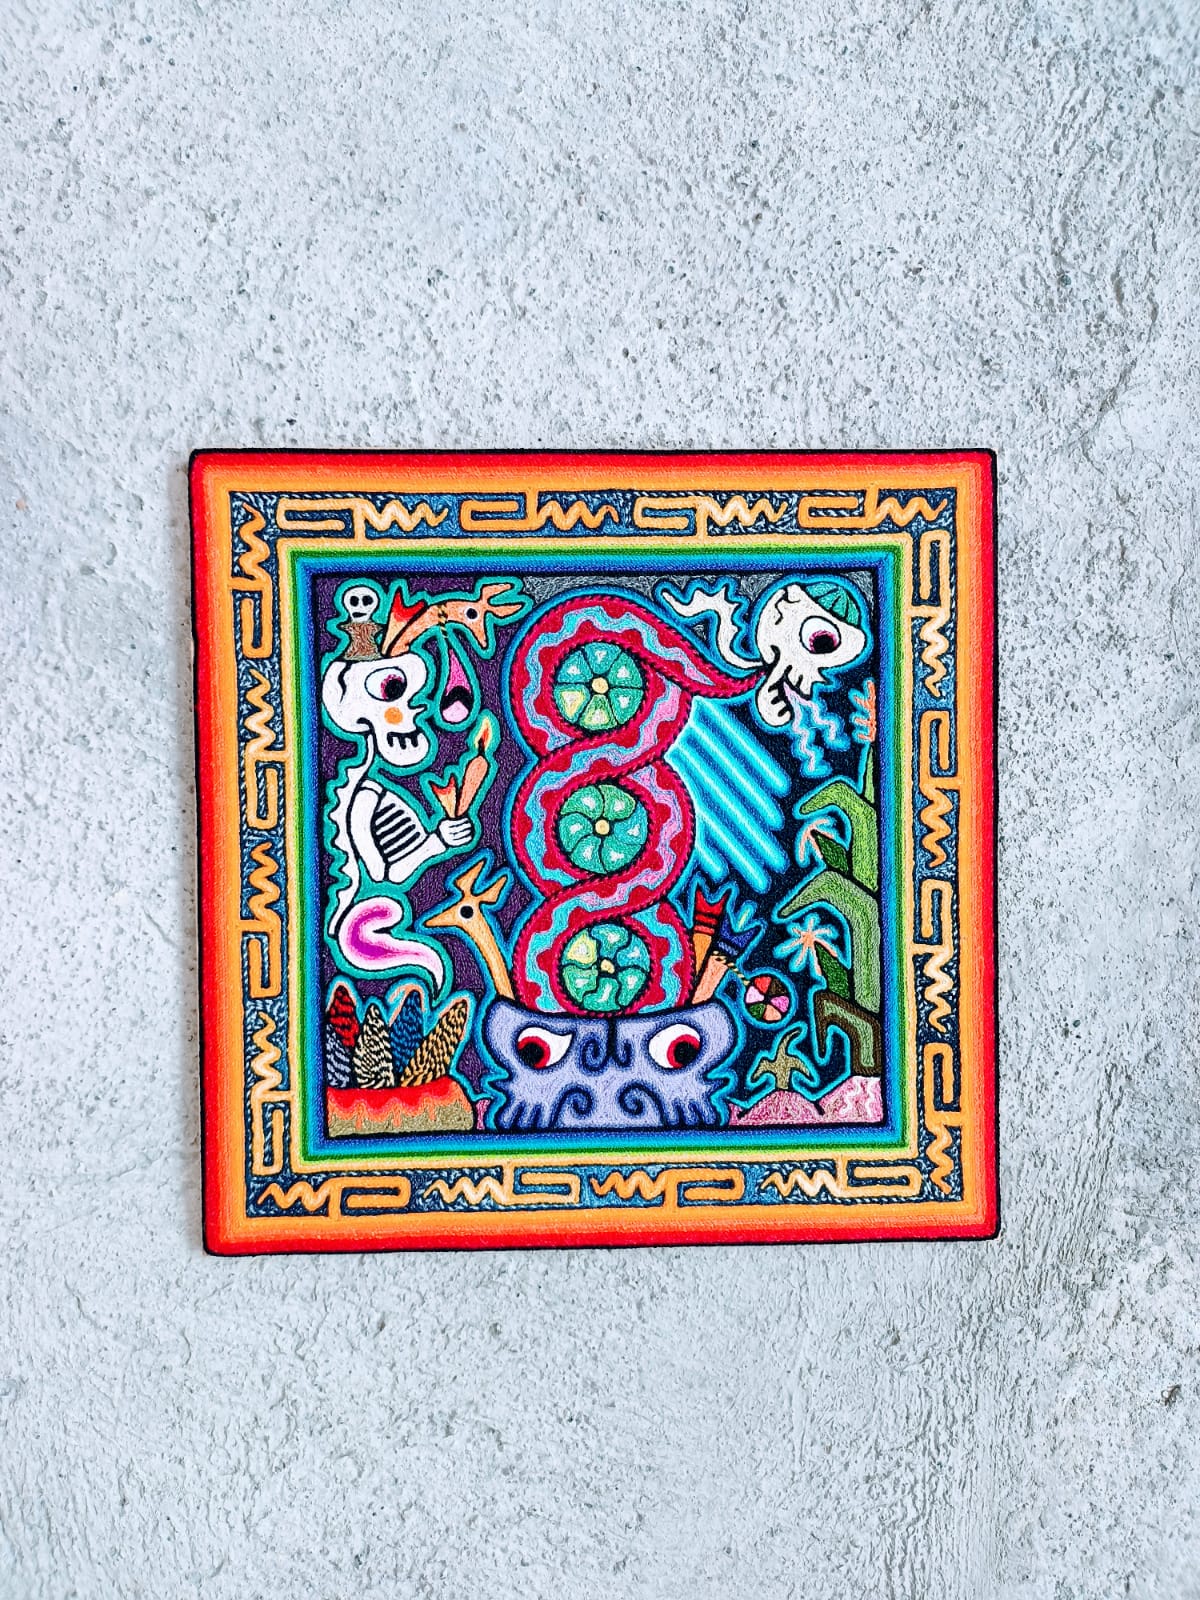 Huichol Indian Yarn Painting by Luis Castro PP6230